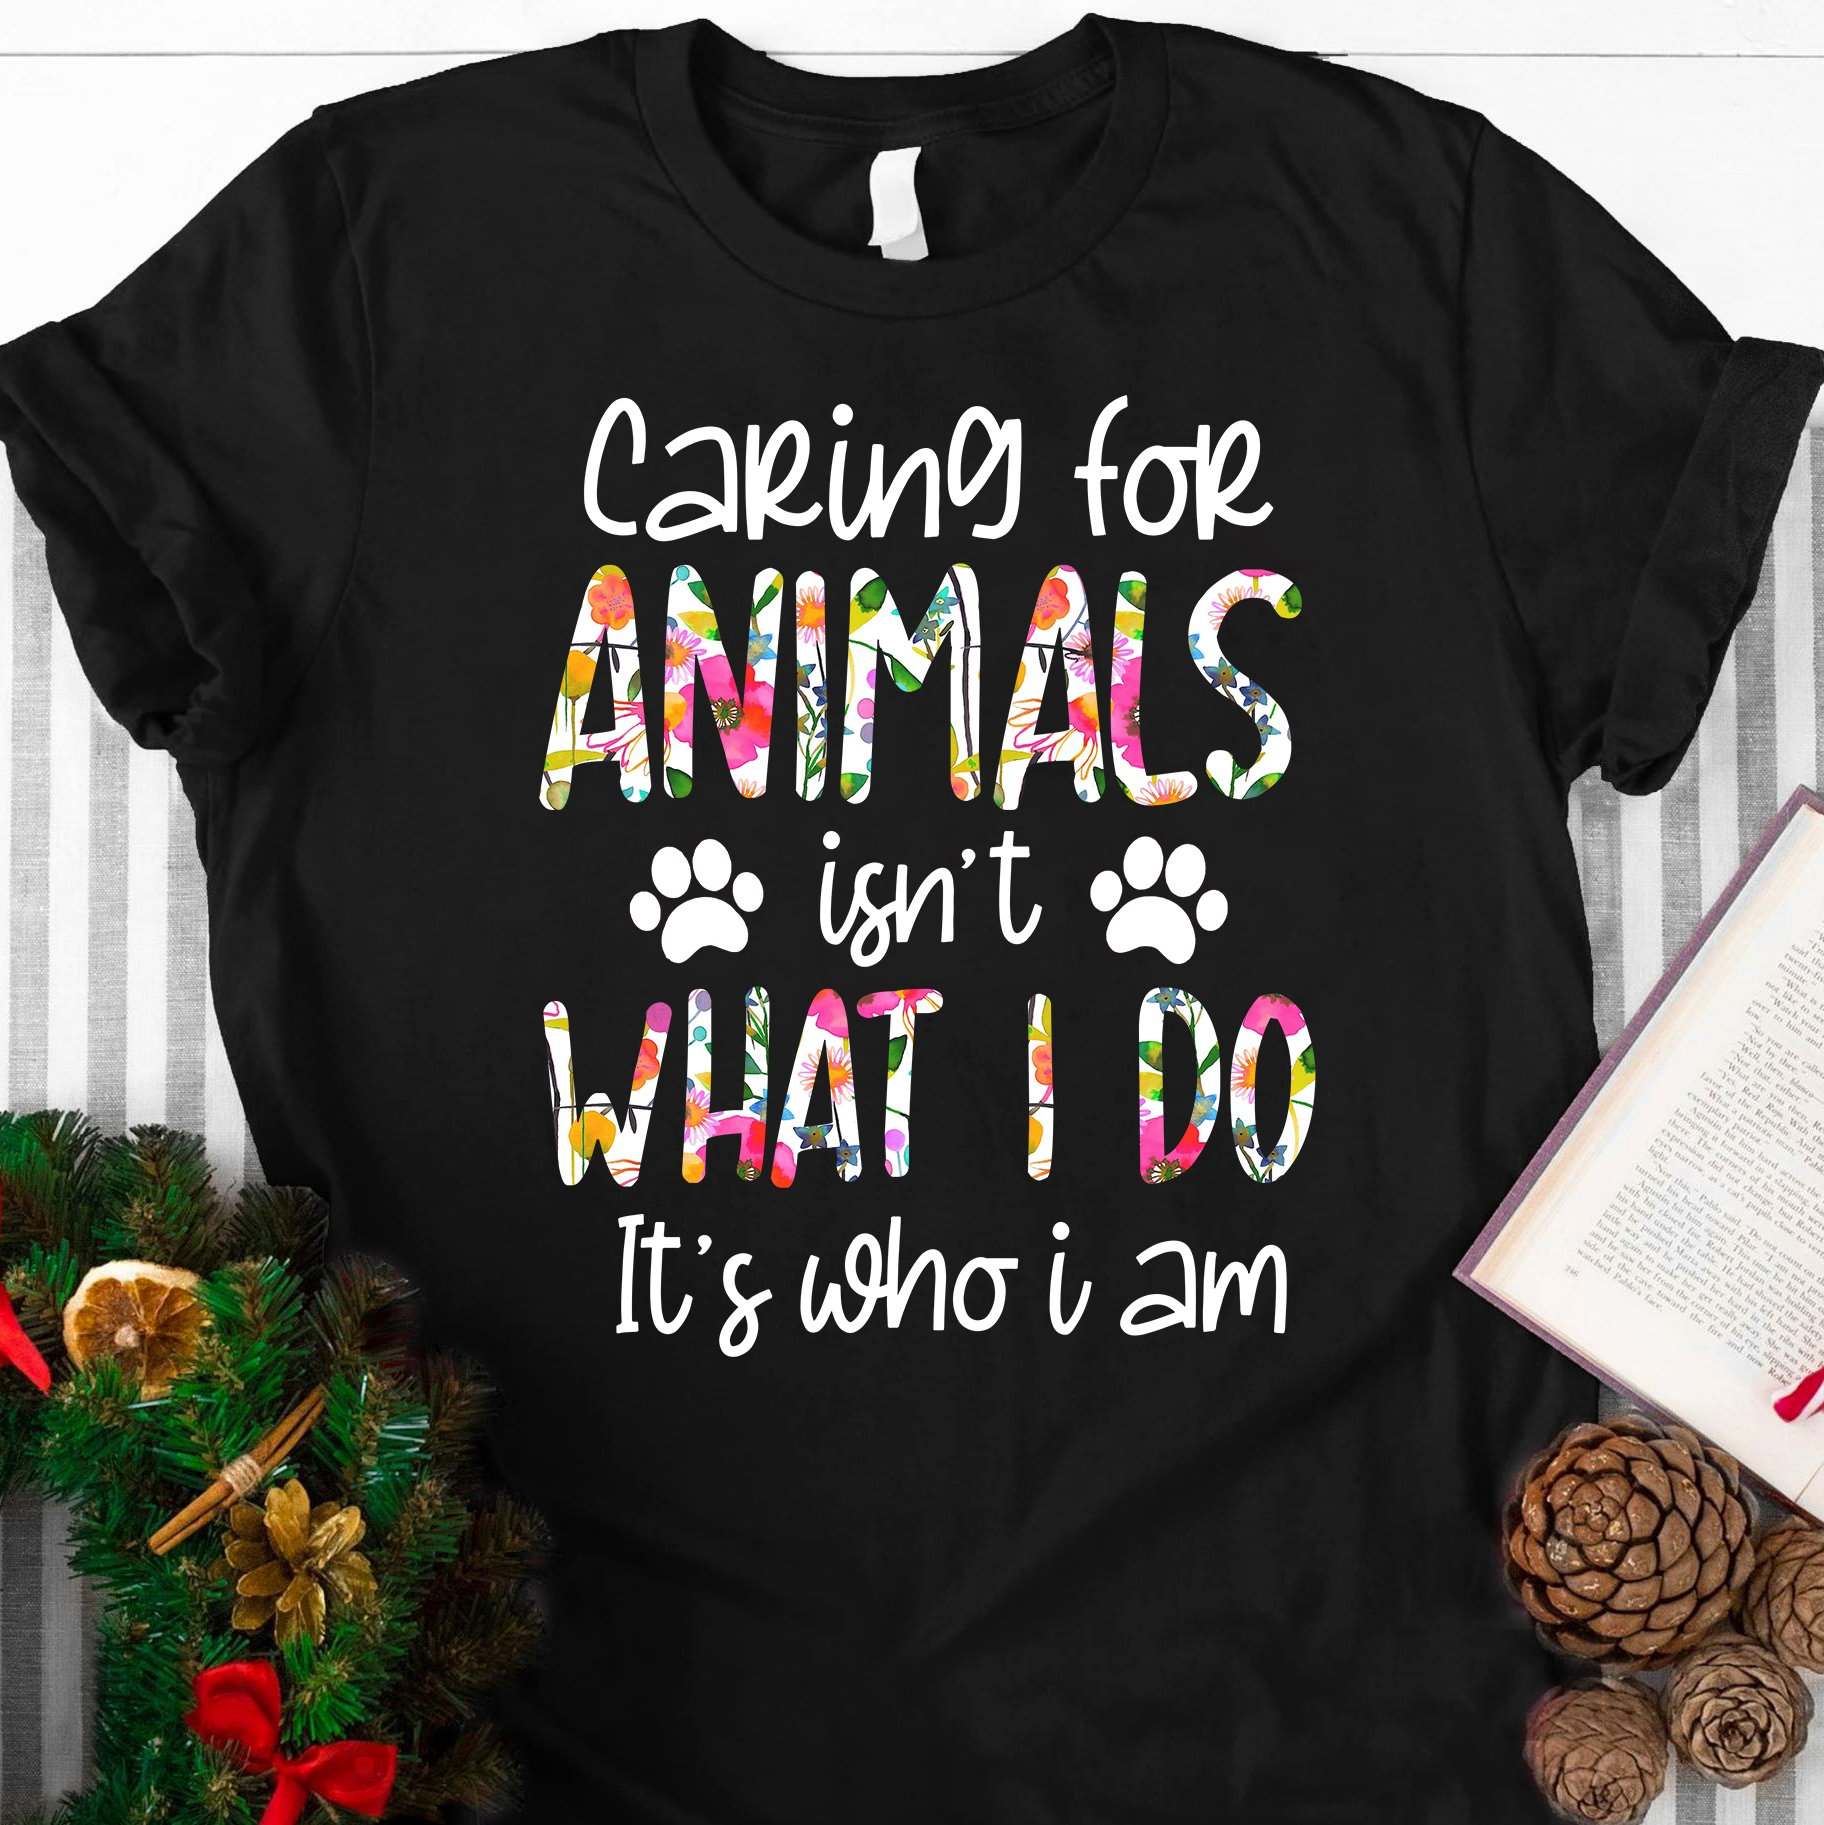 Caring for animals isn't what I do it's who I am - Animal lover, animal person